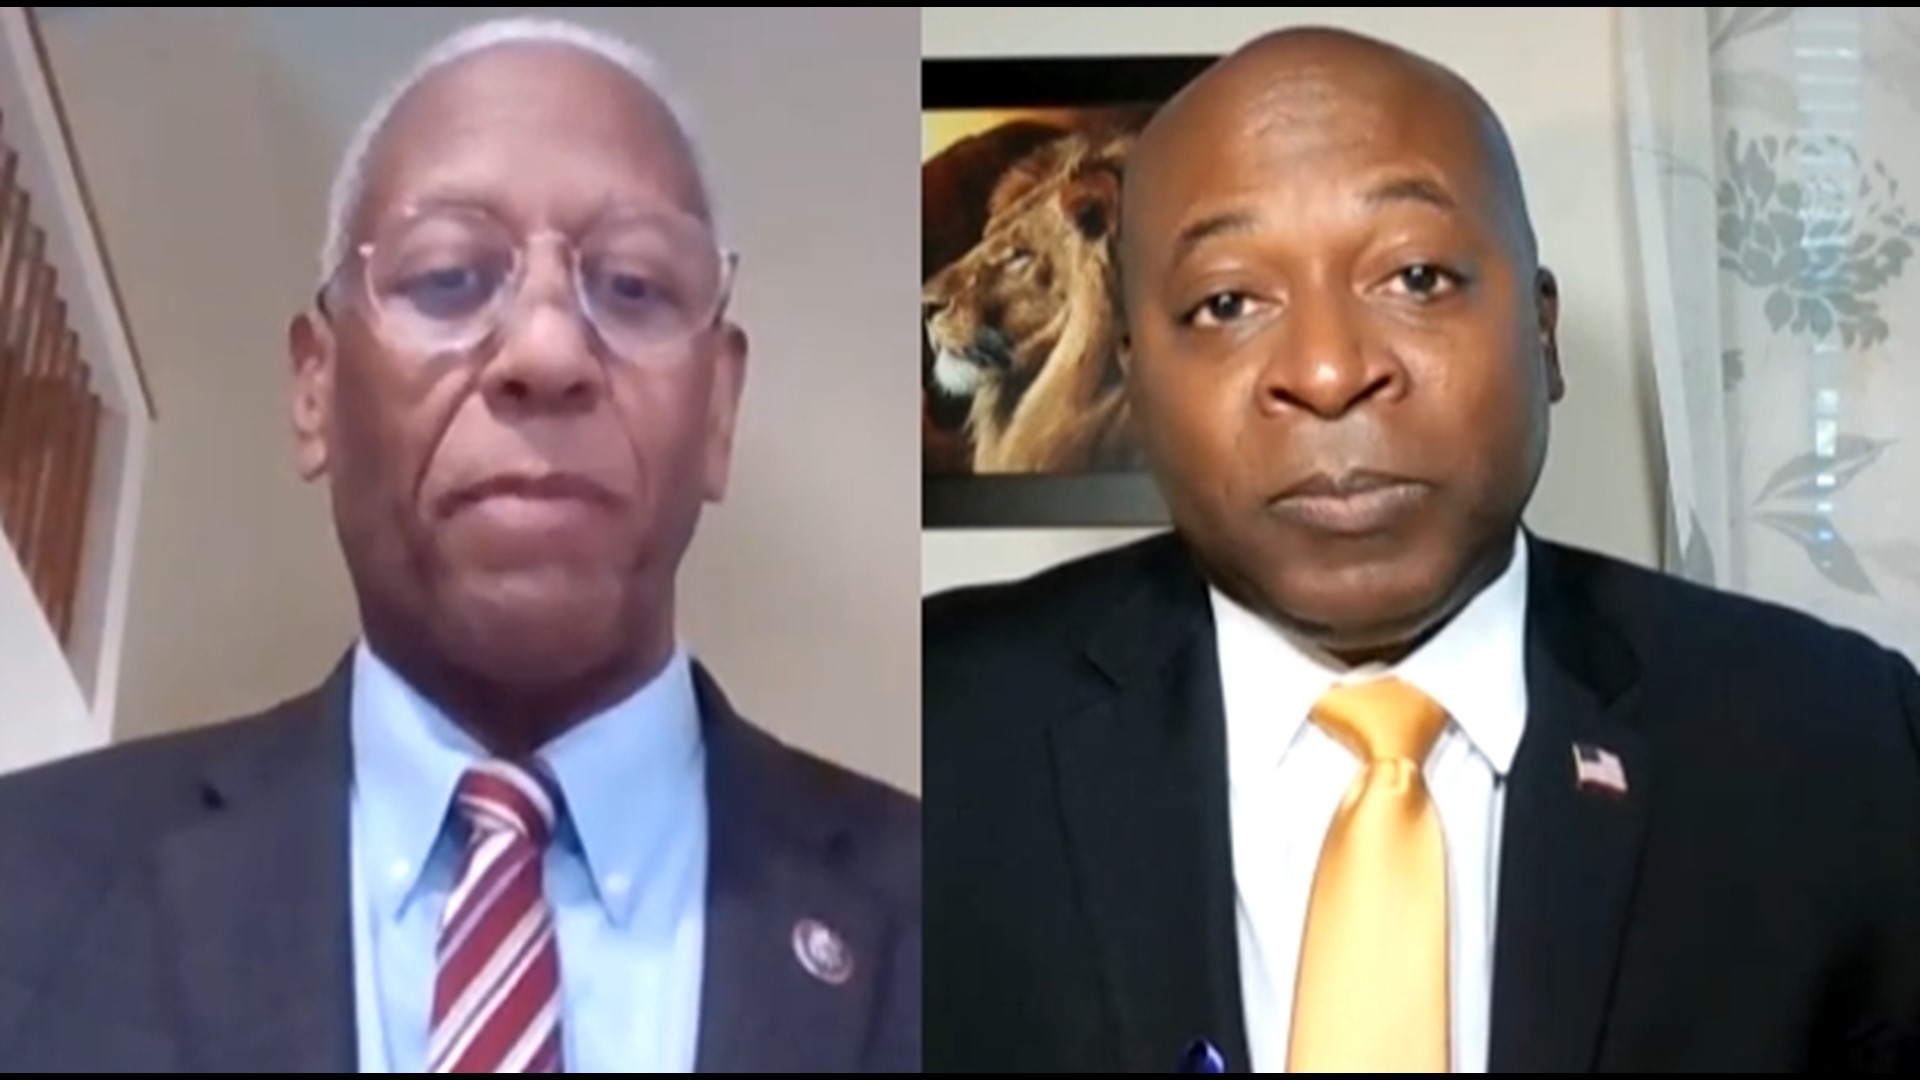 Democratic incumbent Rep. McEachin was first elected in 2016. Republican challenger Benjamin says it's time for a change.